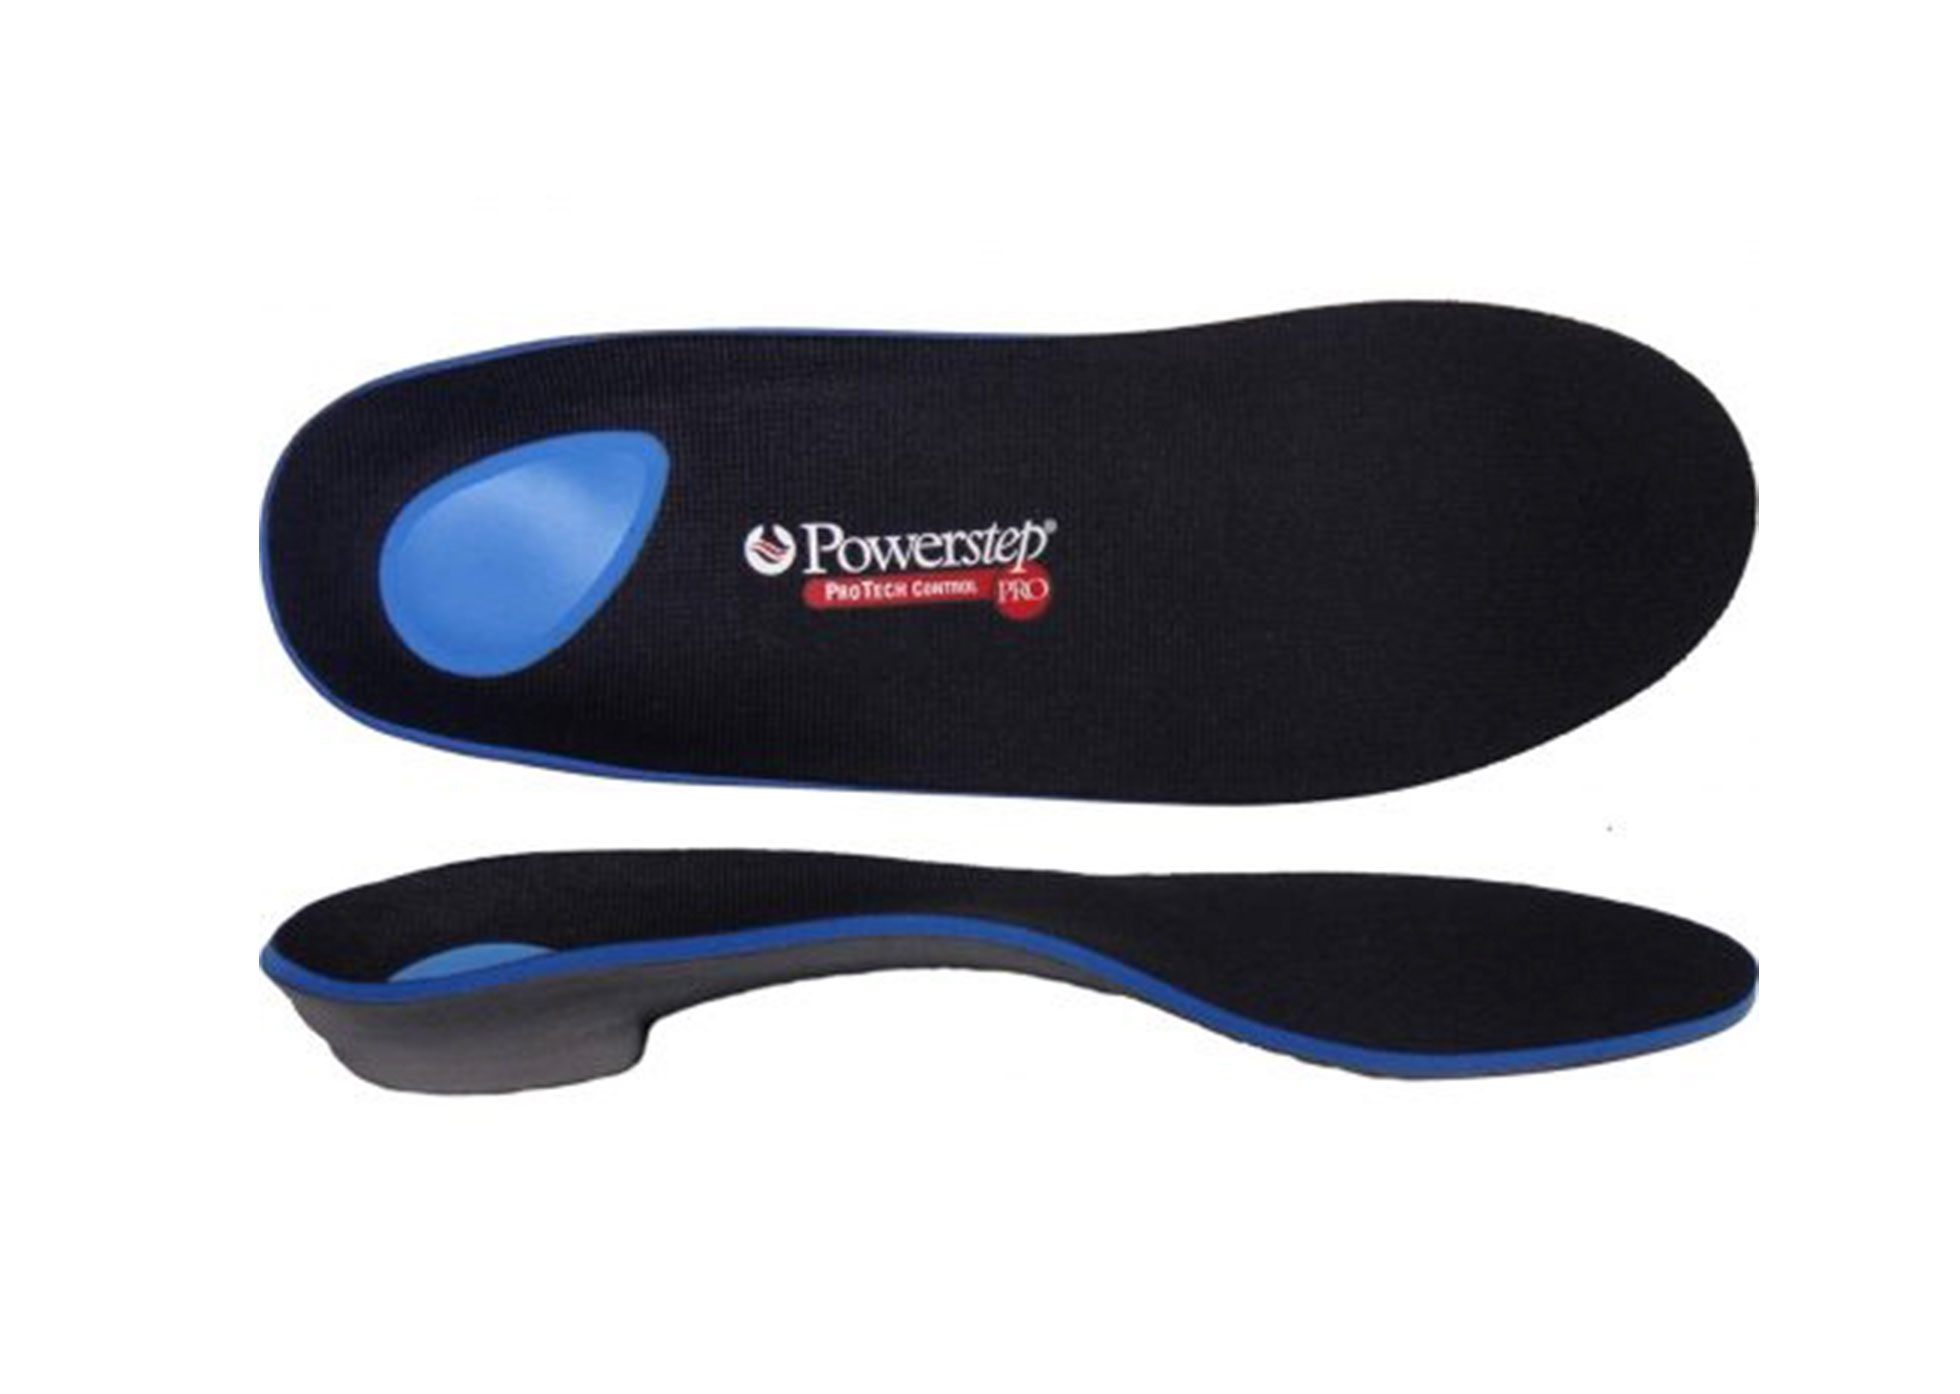 Carnation Footcare - Powerstep Pro Control 3/4 Length - Code B - Mens - 6 - 7.5 / Womens - 7.5 - 9 - Insoles